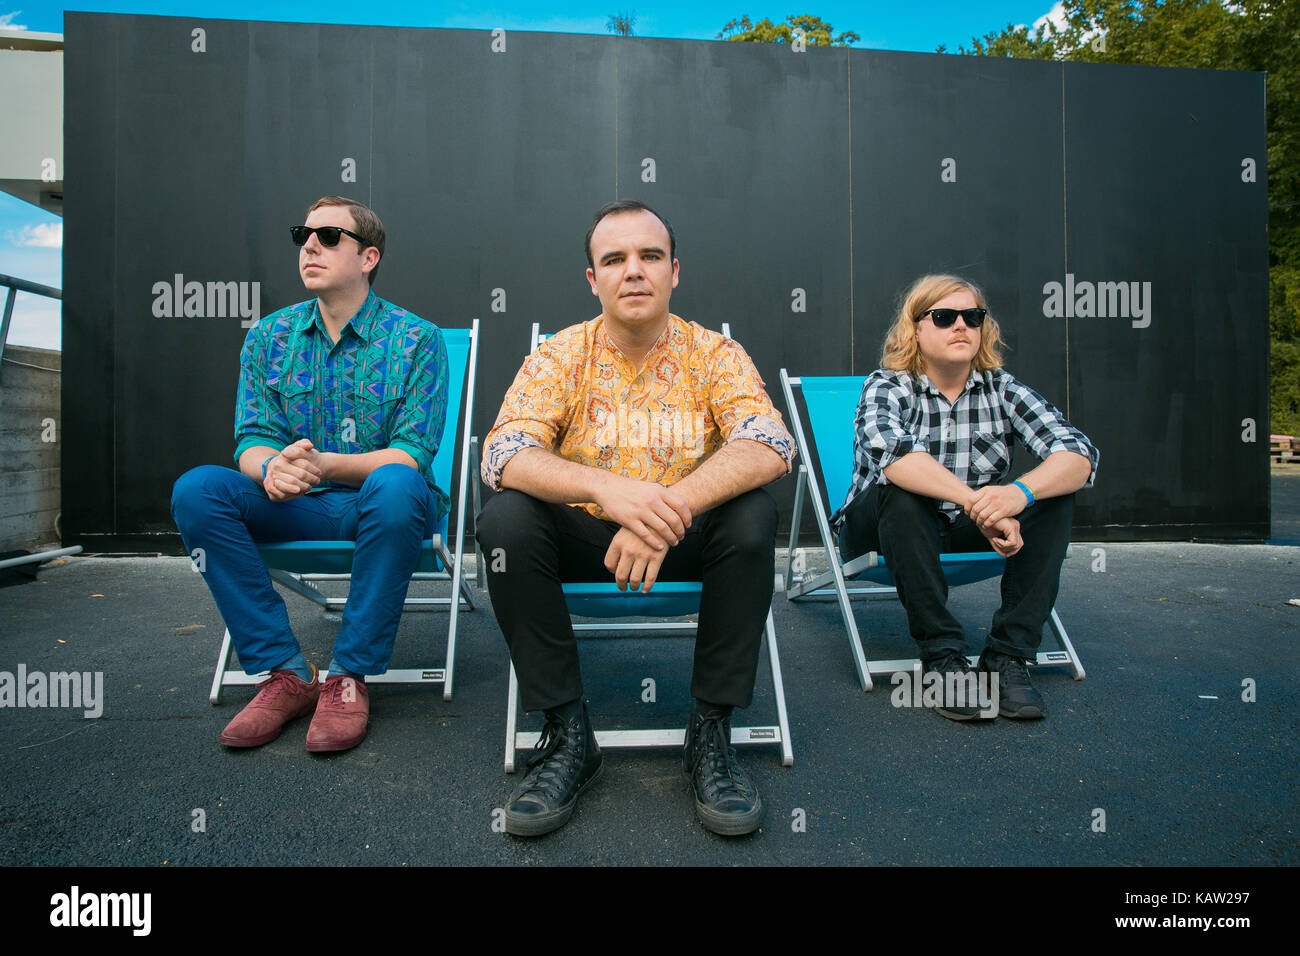 The American synthpop band Future Islands portrayed backstage before a live concert at the Norwegian music festival Øyafestivalen 2015 in Oslo. (L-R) Gerrit Welmers, Samuel T. Herring and William Cashion. Stock Photo